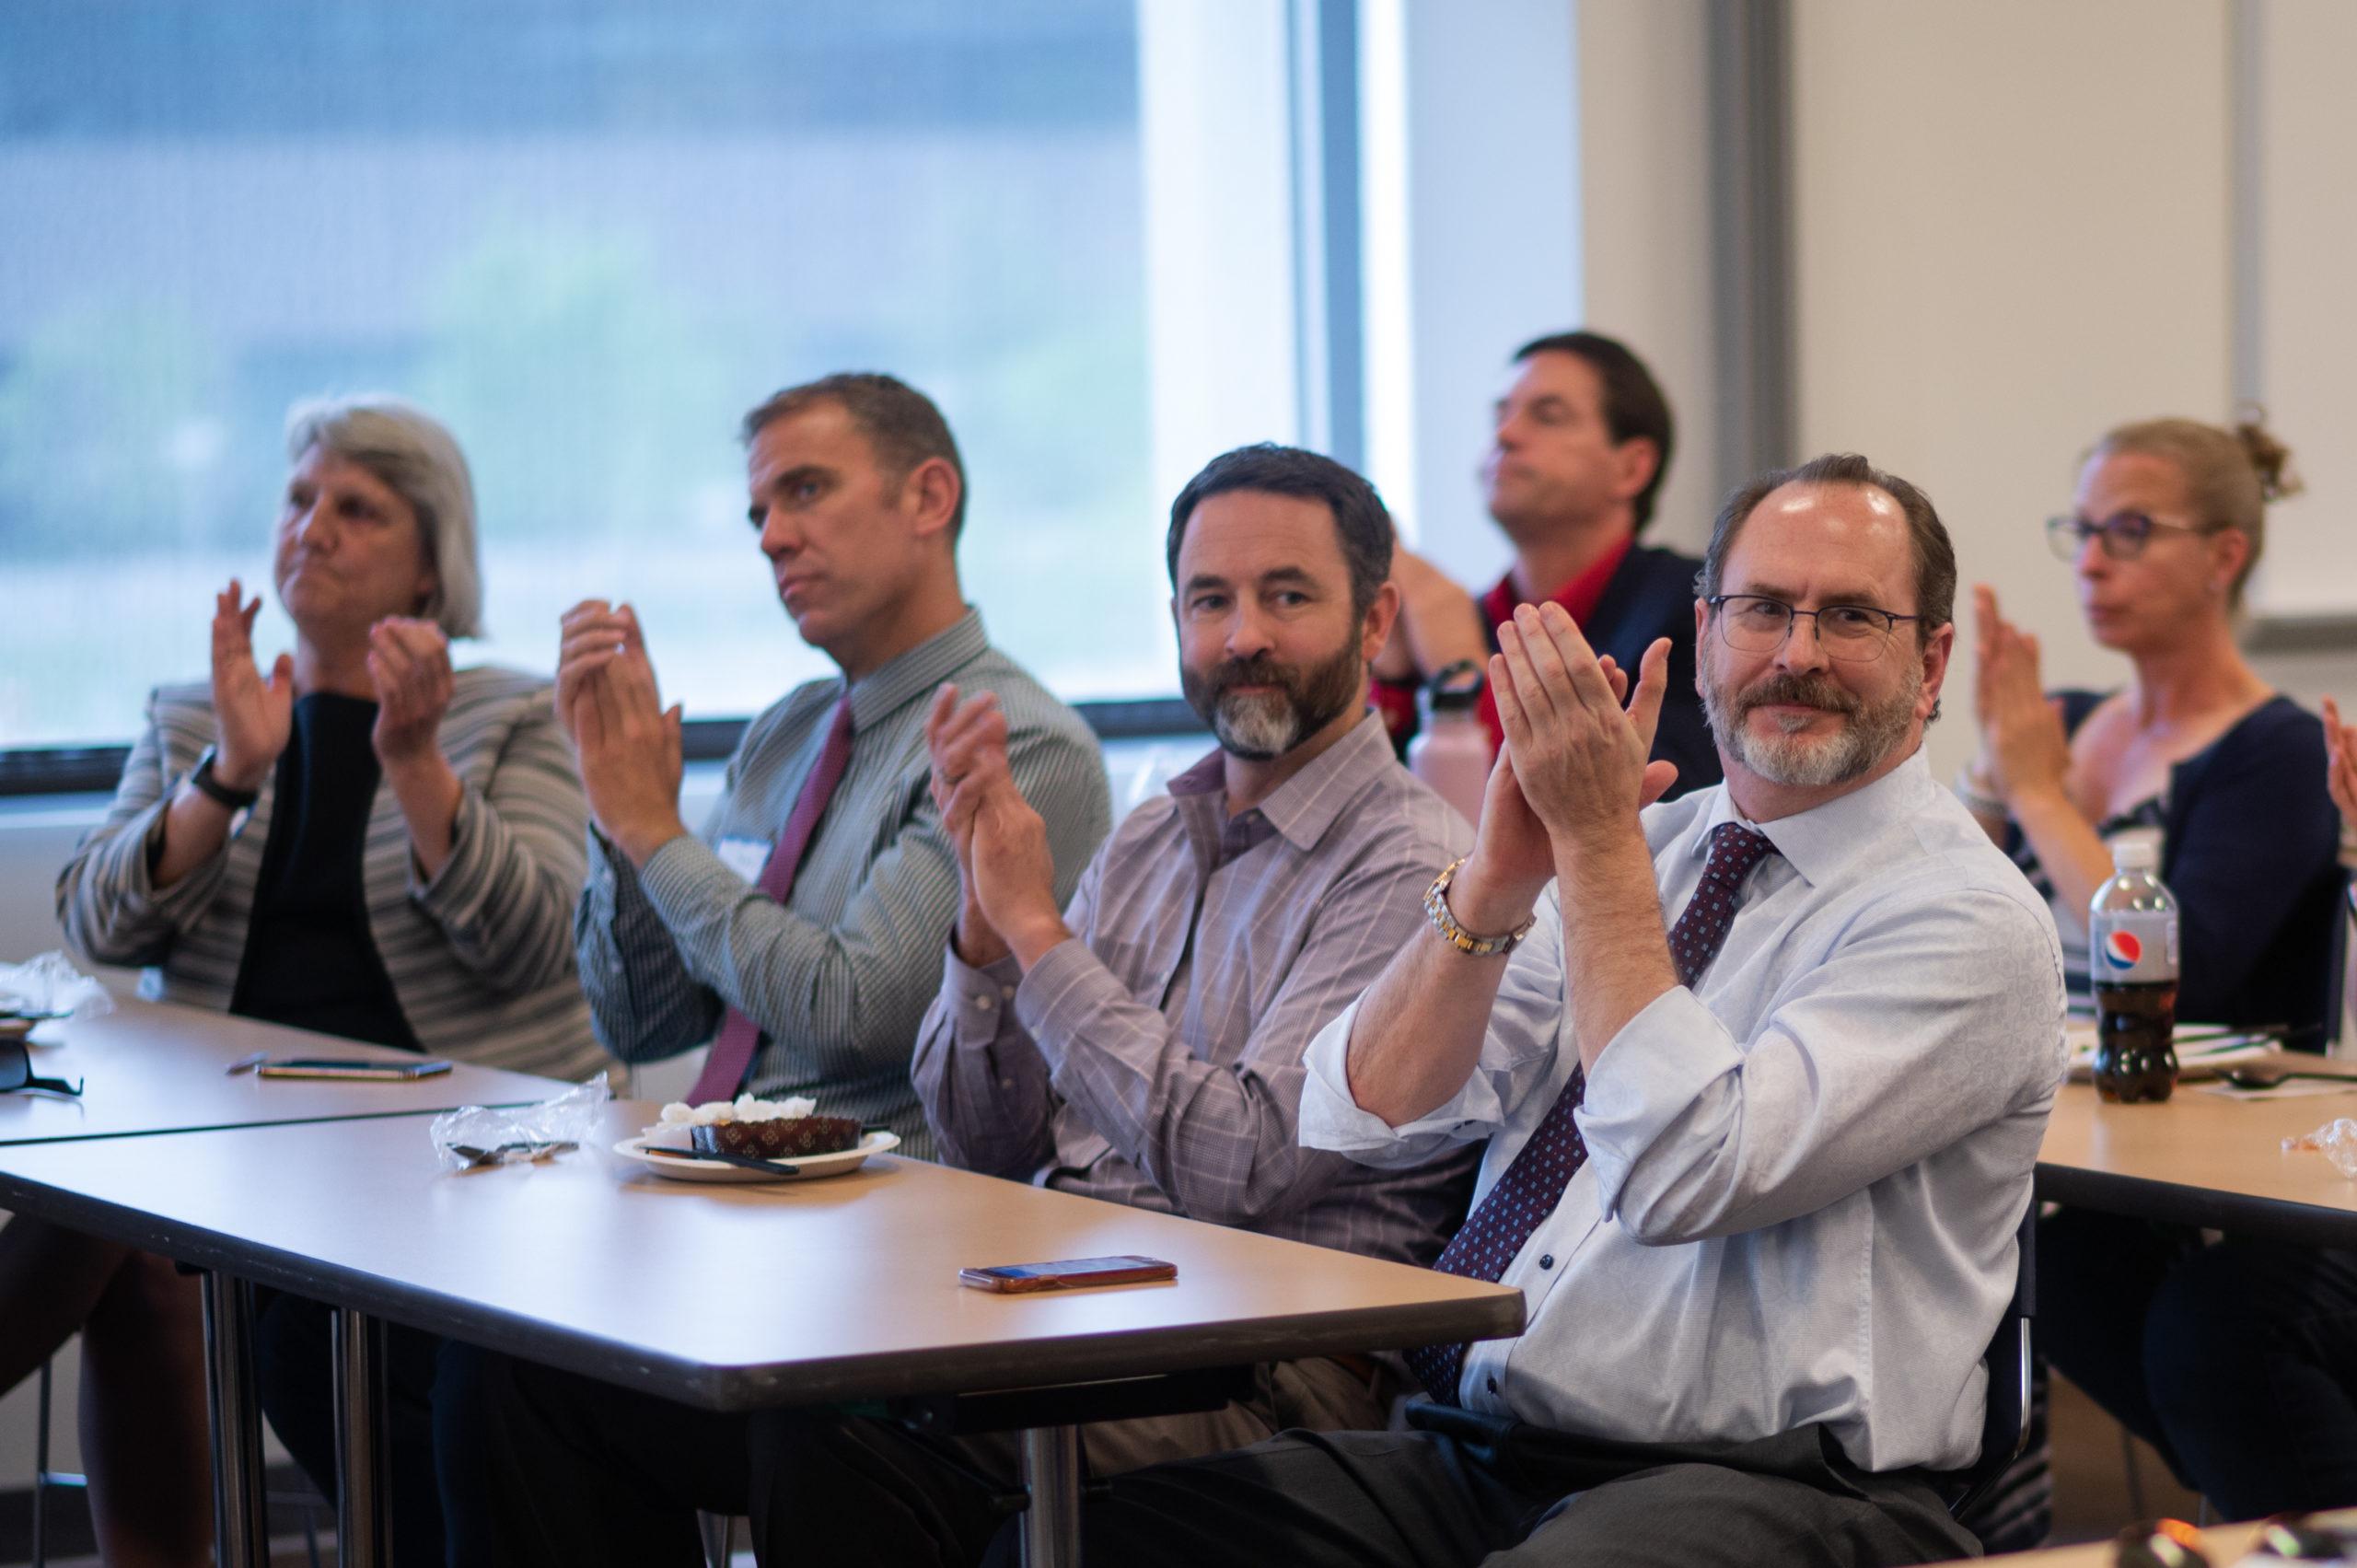 Faculty members clapping at an event.